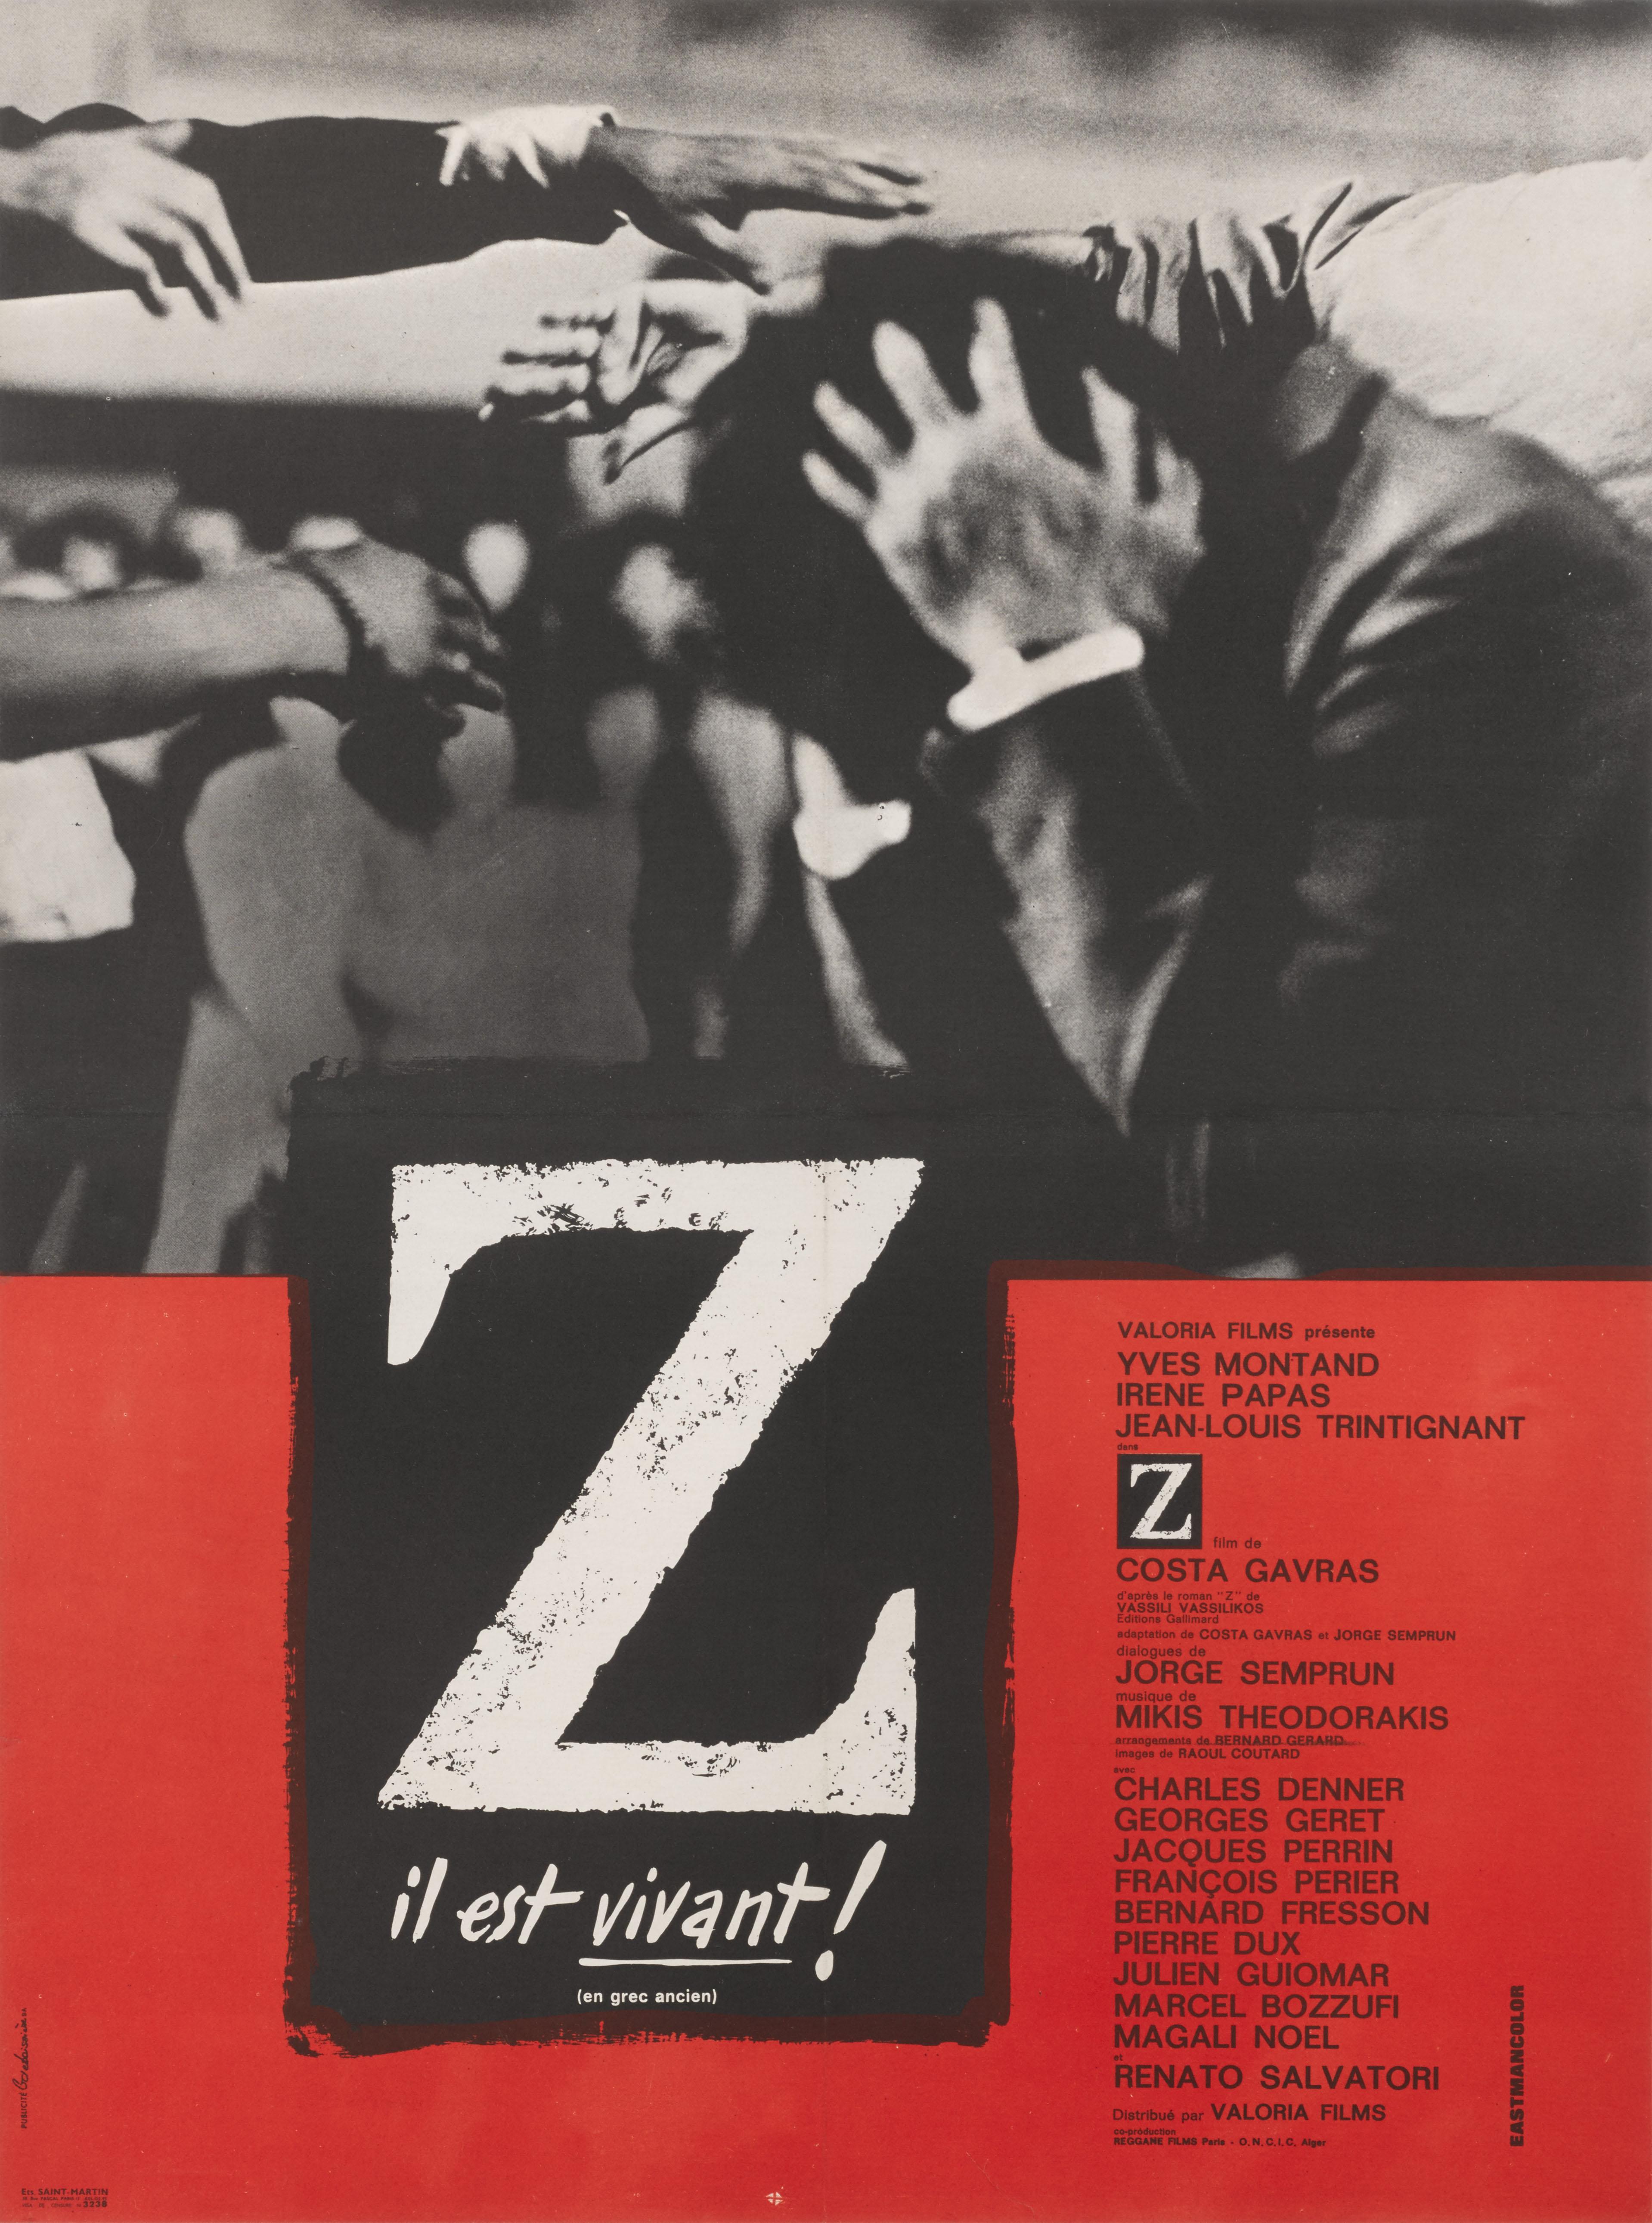 Original French film poster for the 1969 film Z. This film starred Yves Montand, Irene Papas, Jean-Louis Trintignant This film was directed by Costa-Gavras This size poster would have been used outside the cinema at the time of the films release in